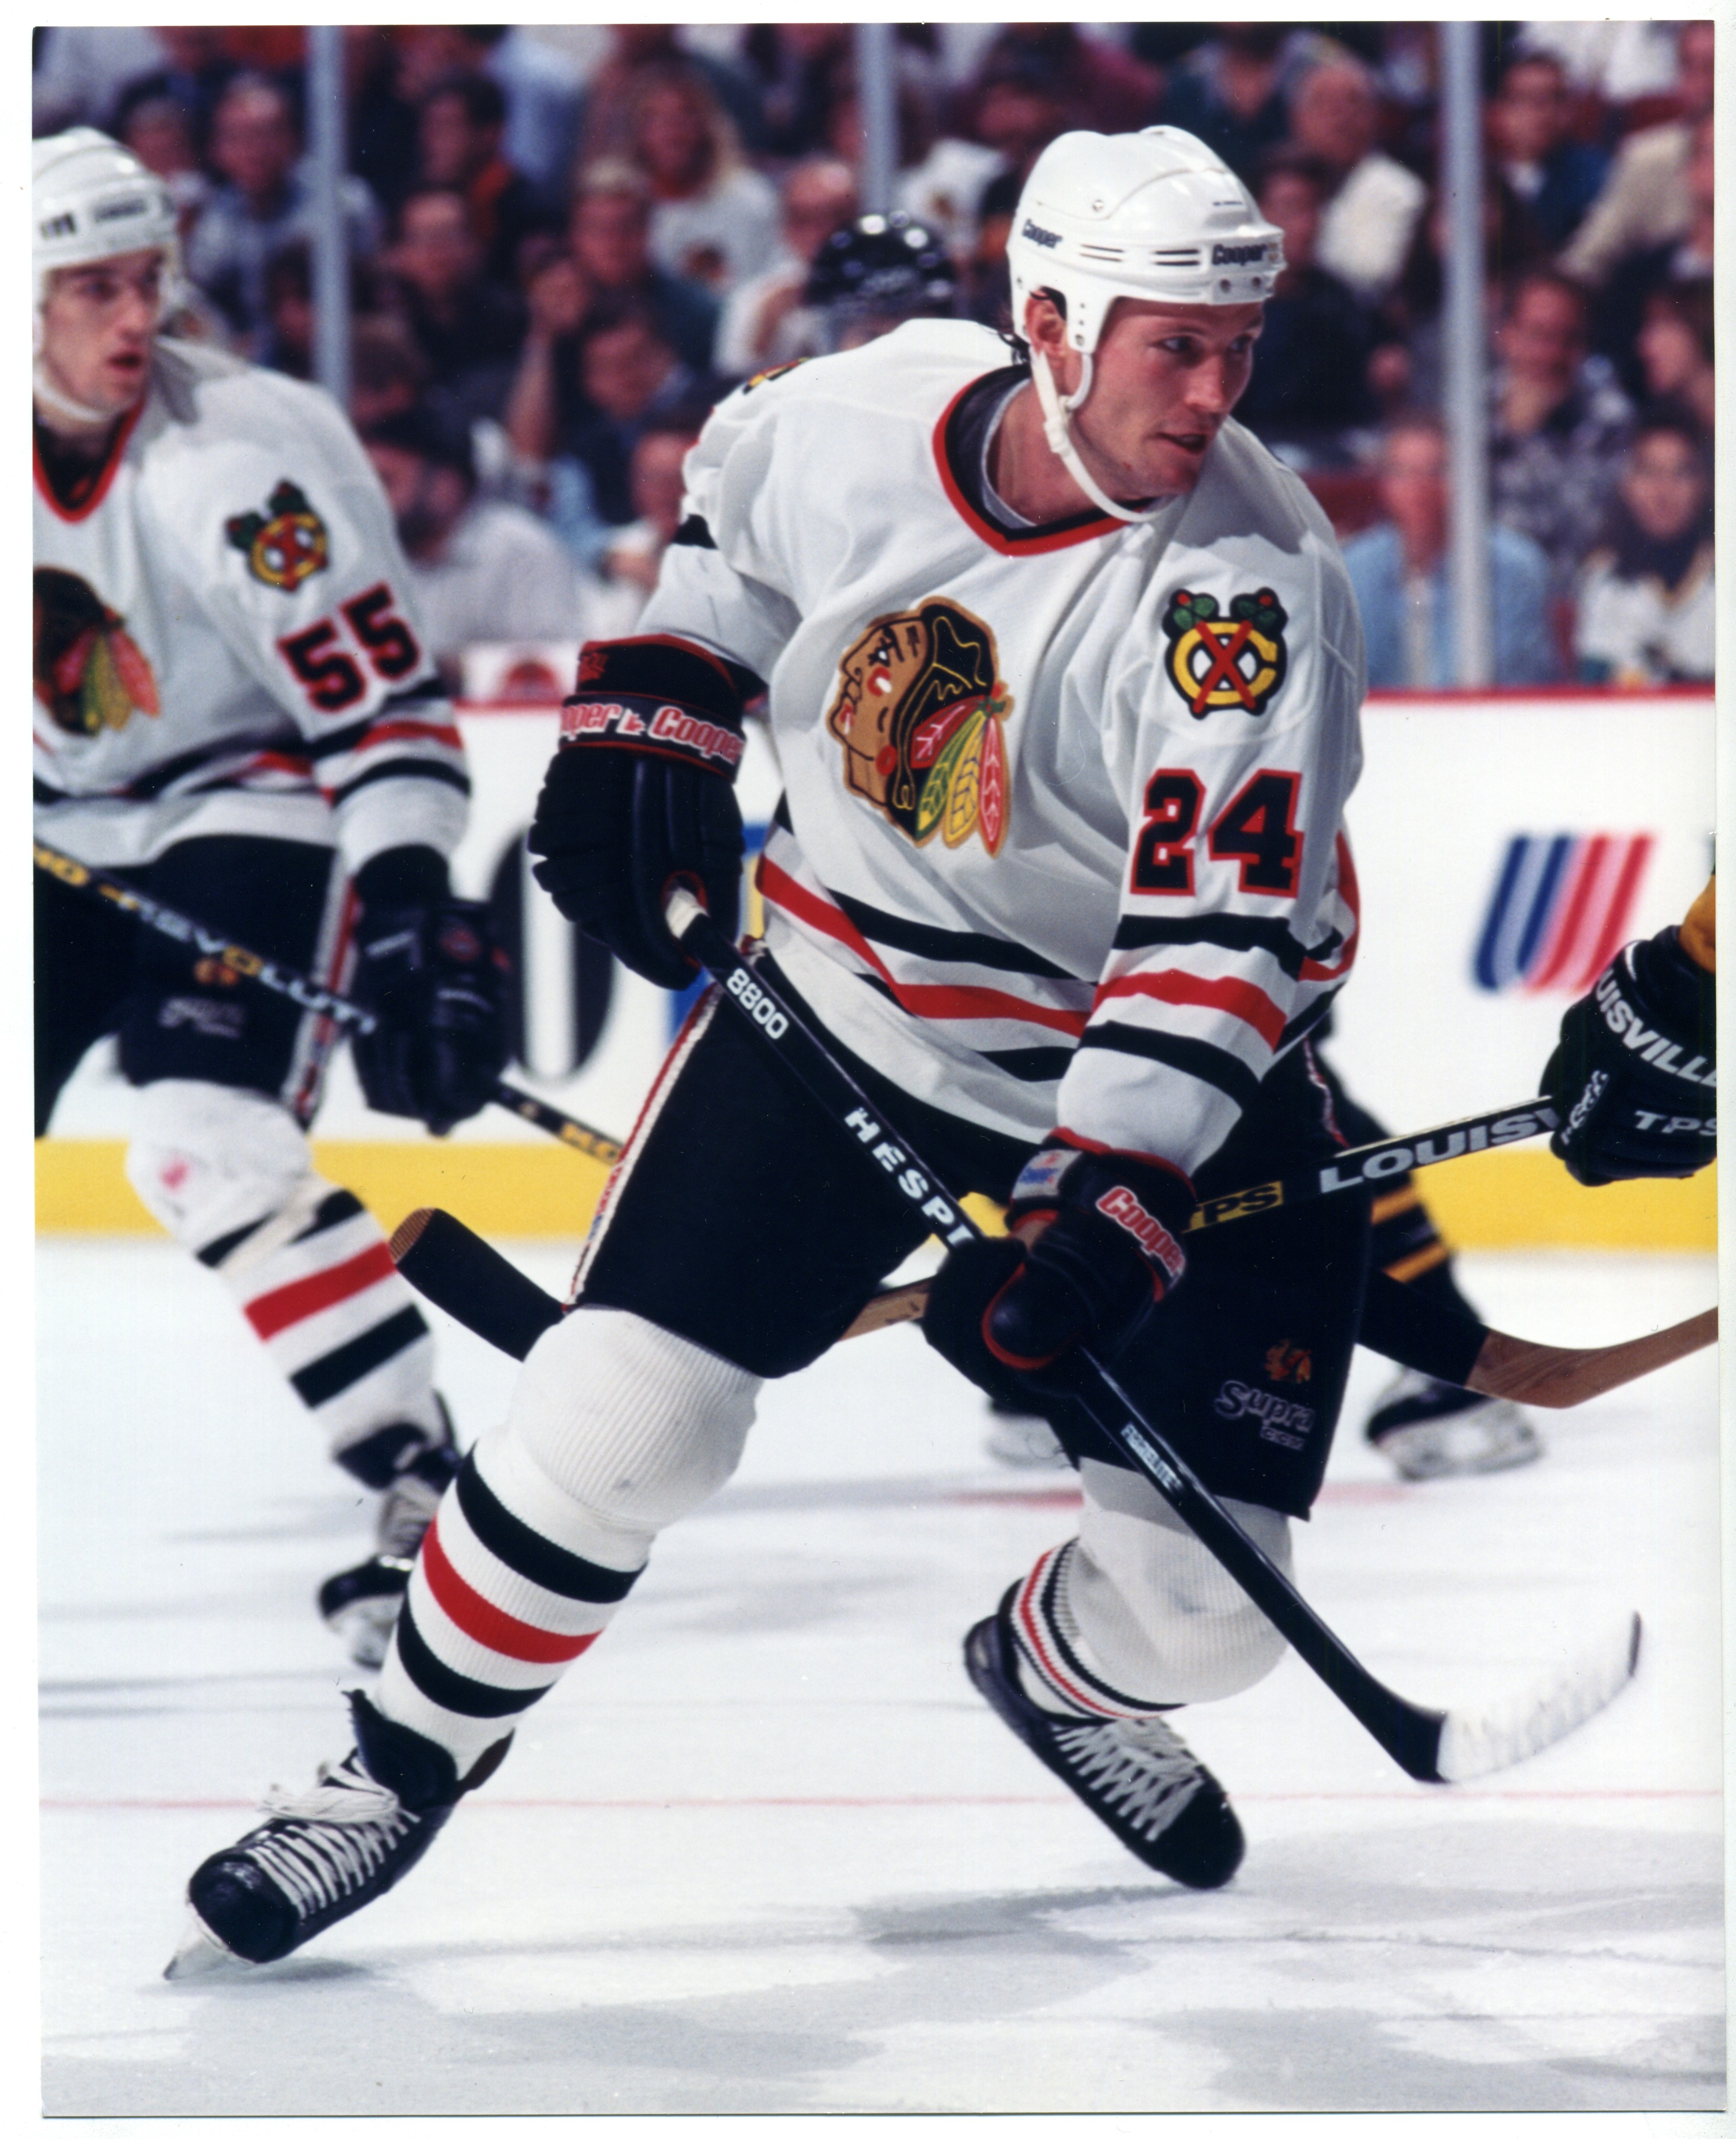 Tough Guy: The Bob Probert Story Released, An Interview with Director  Geordie Day